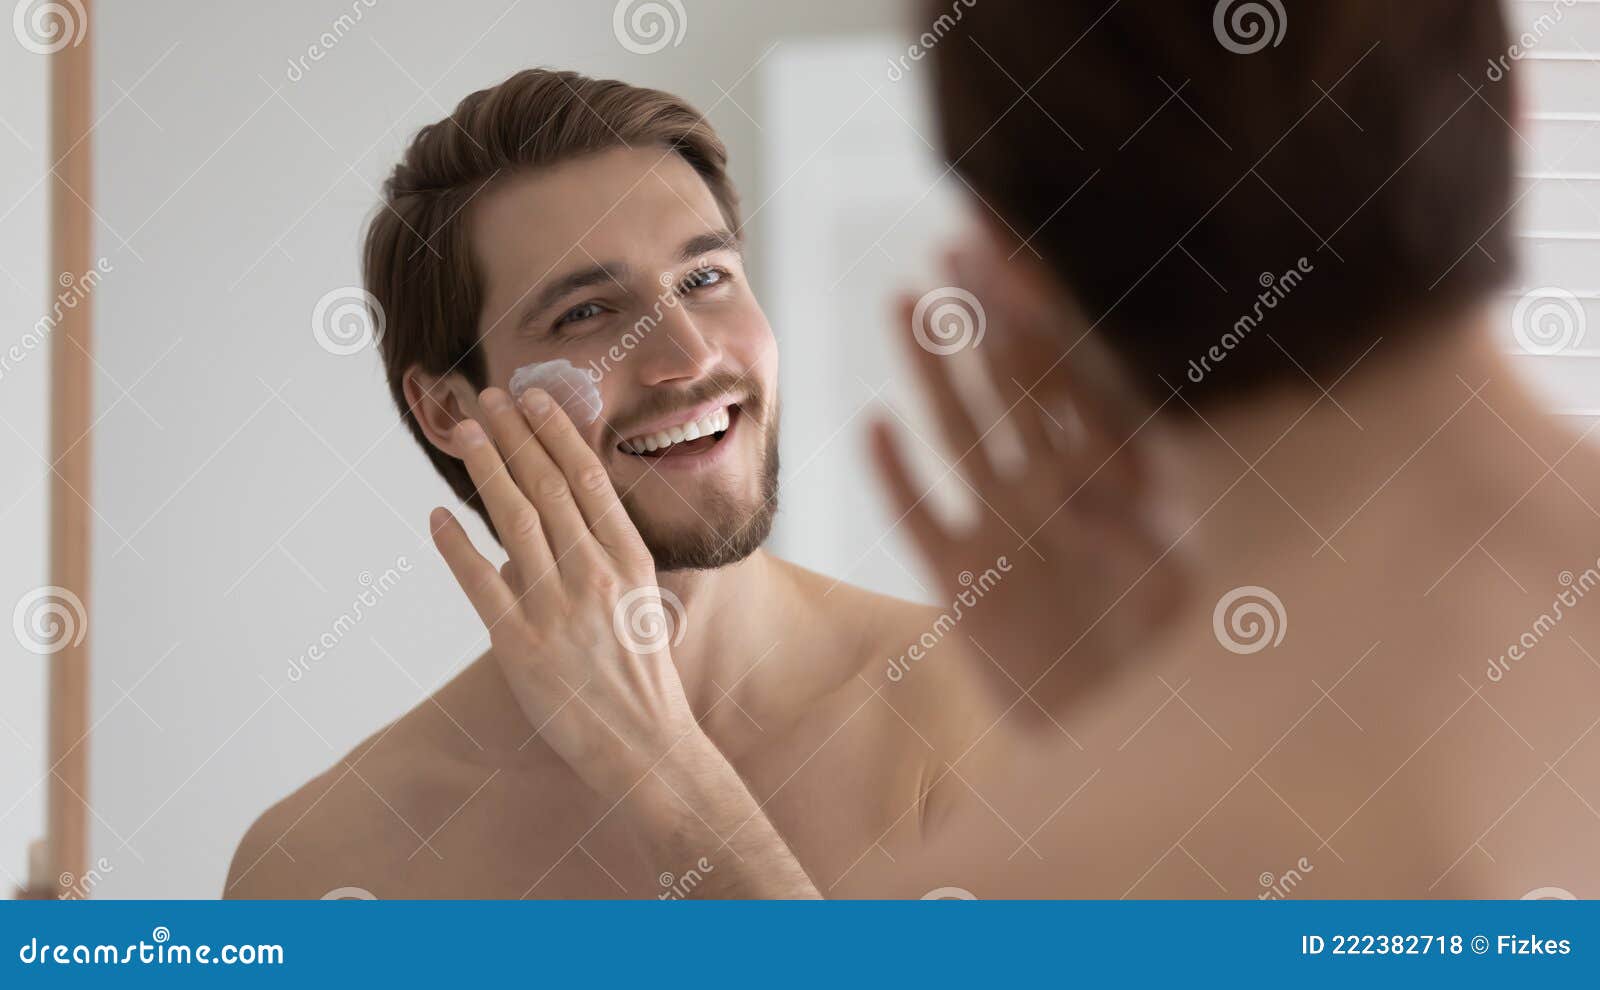 happy handsome metrosexual guy applying sunscreen on face at mirror